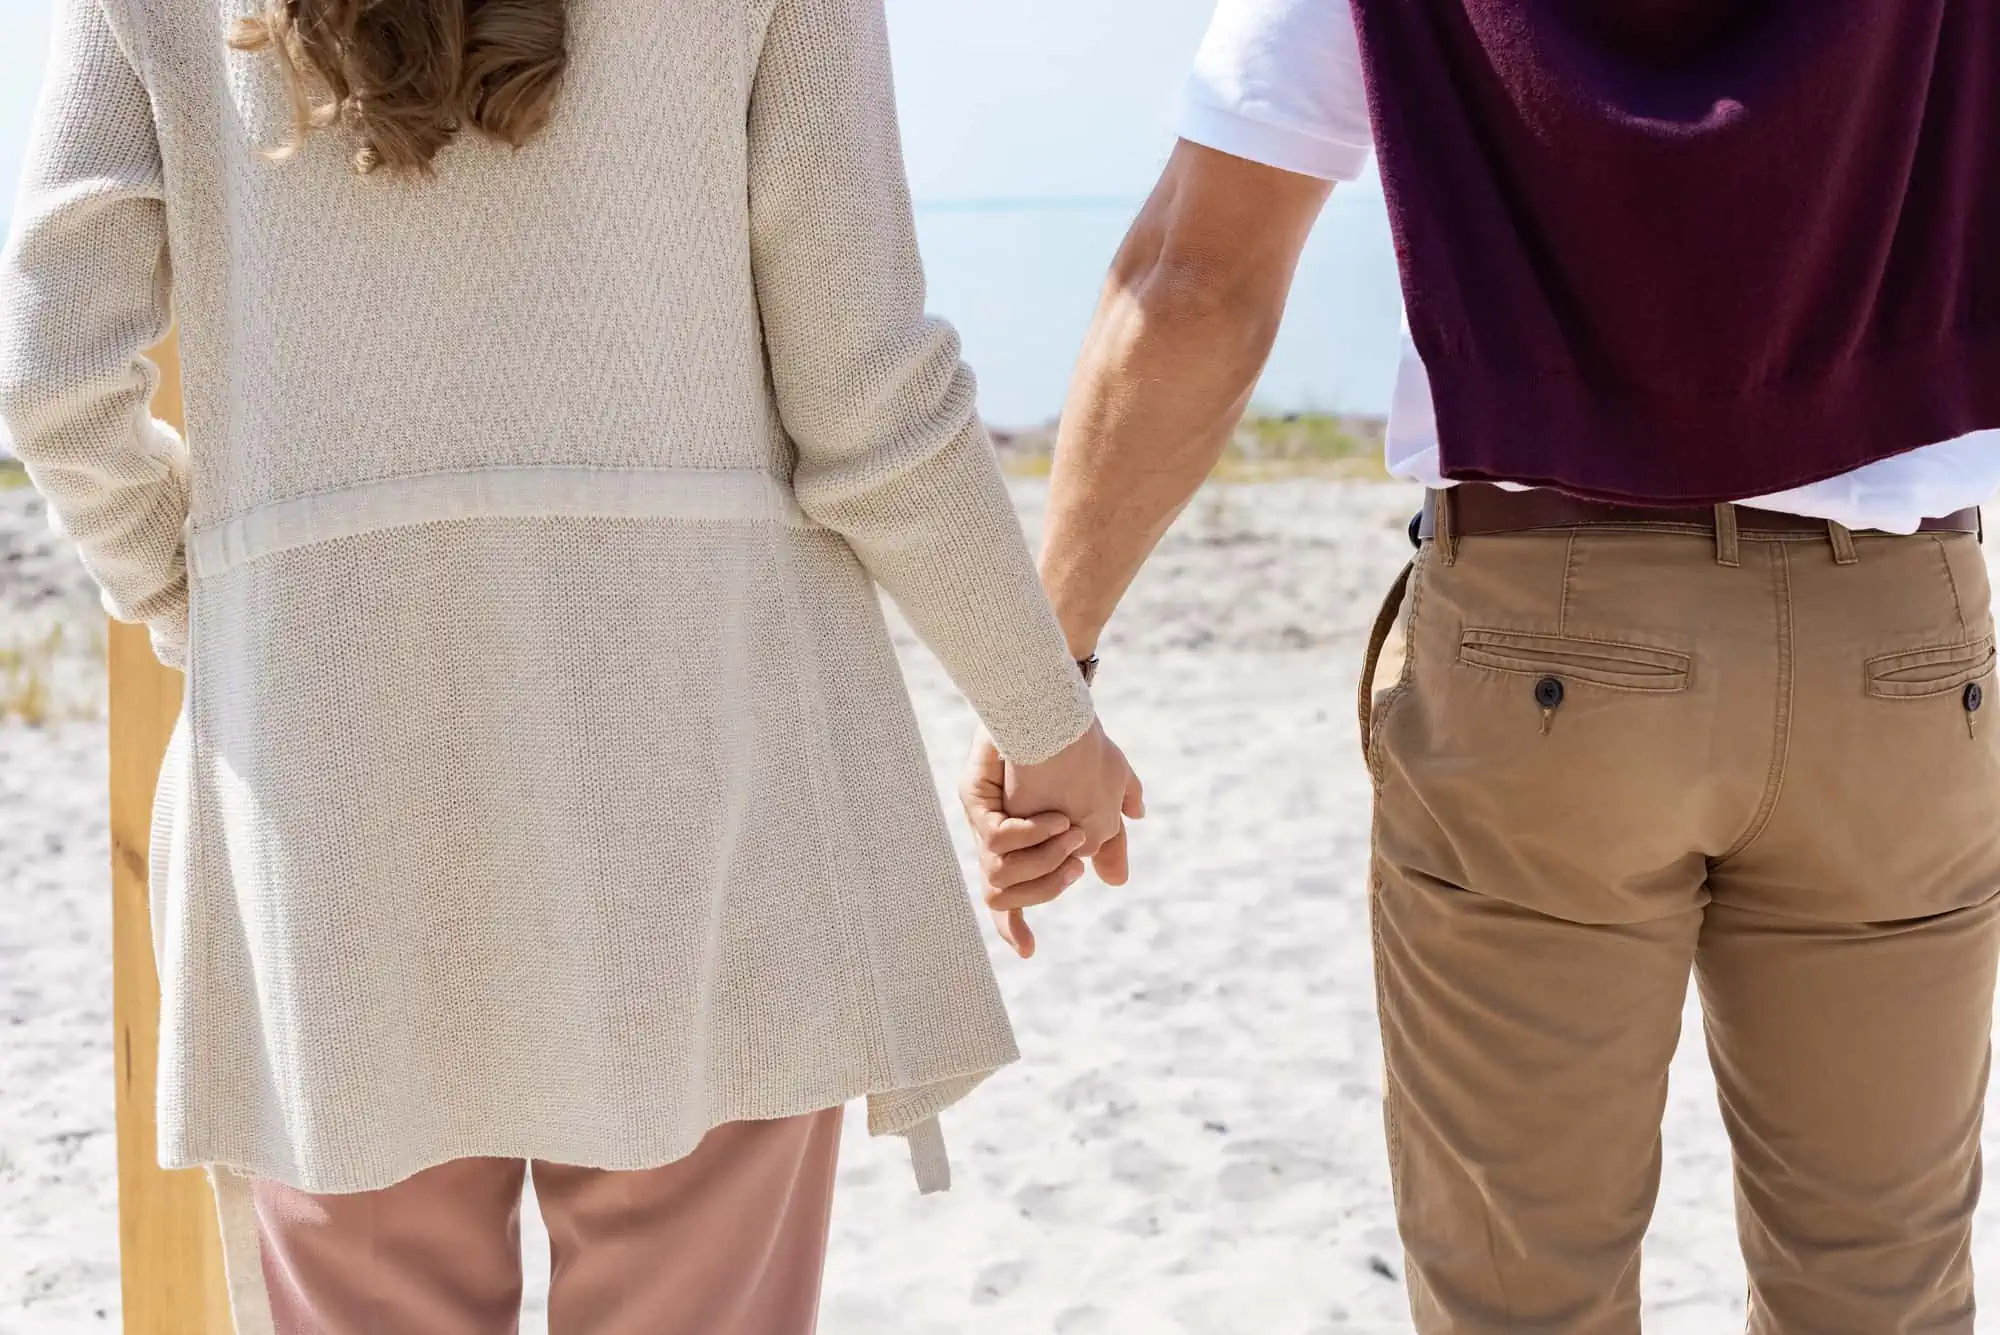 A man and a woman holding hands on a beach